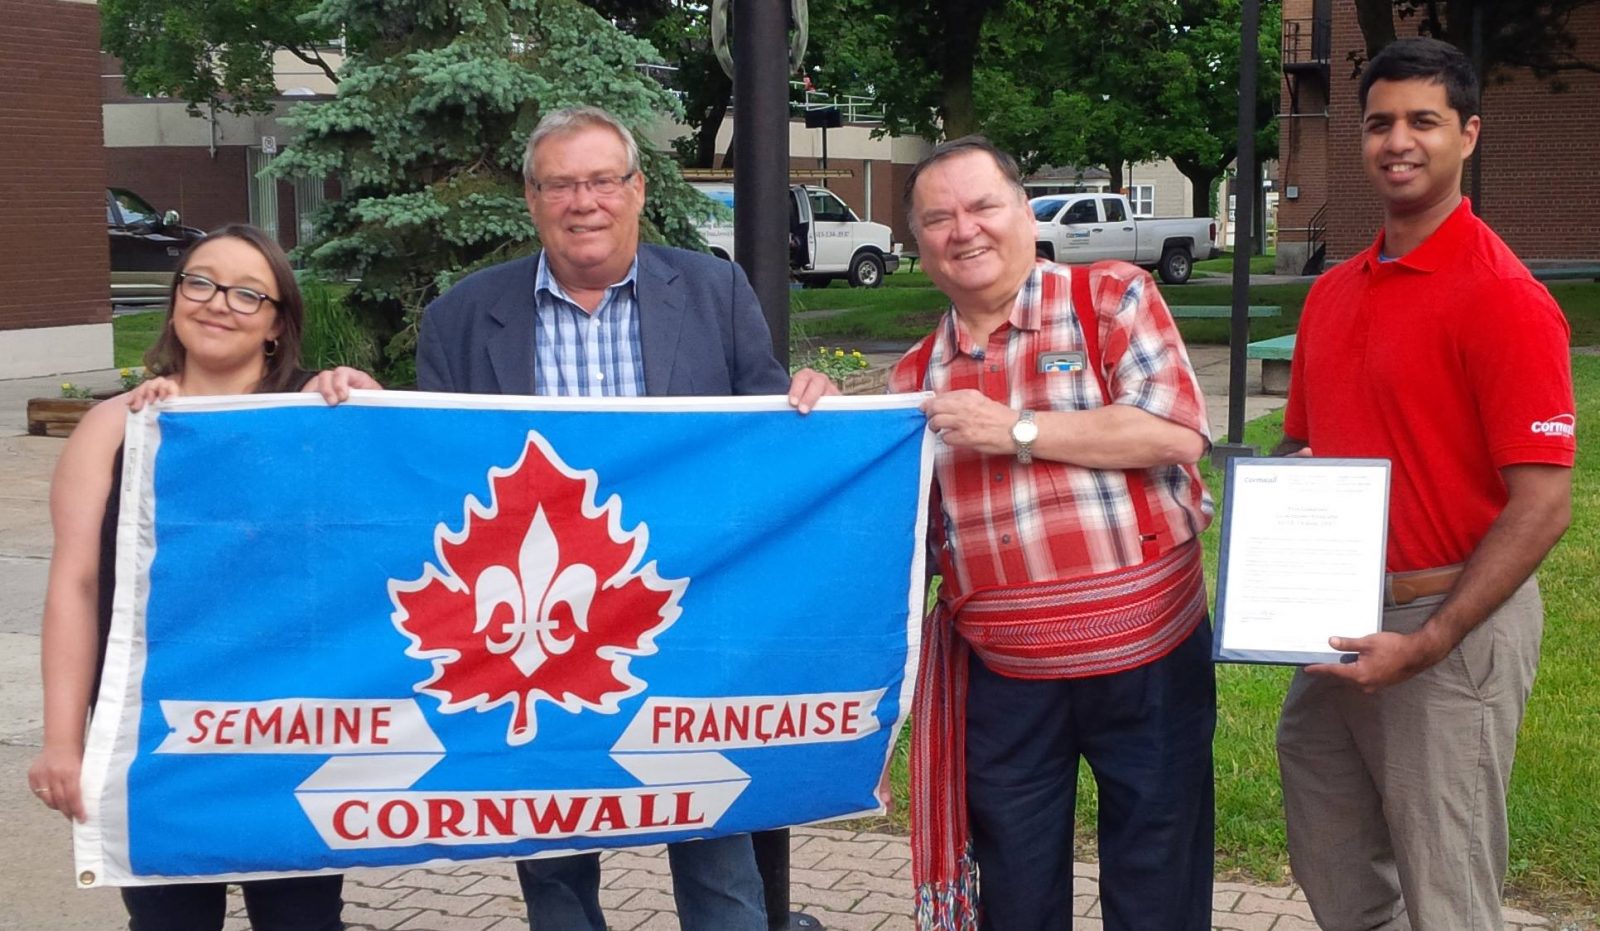 City of Cornwall proclaims June 18-24 as La Semaine française